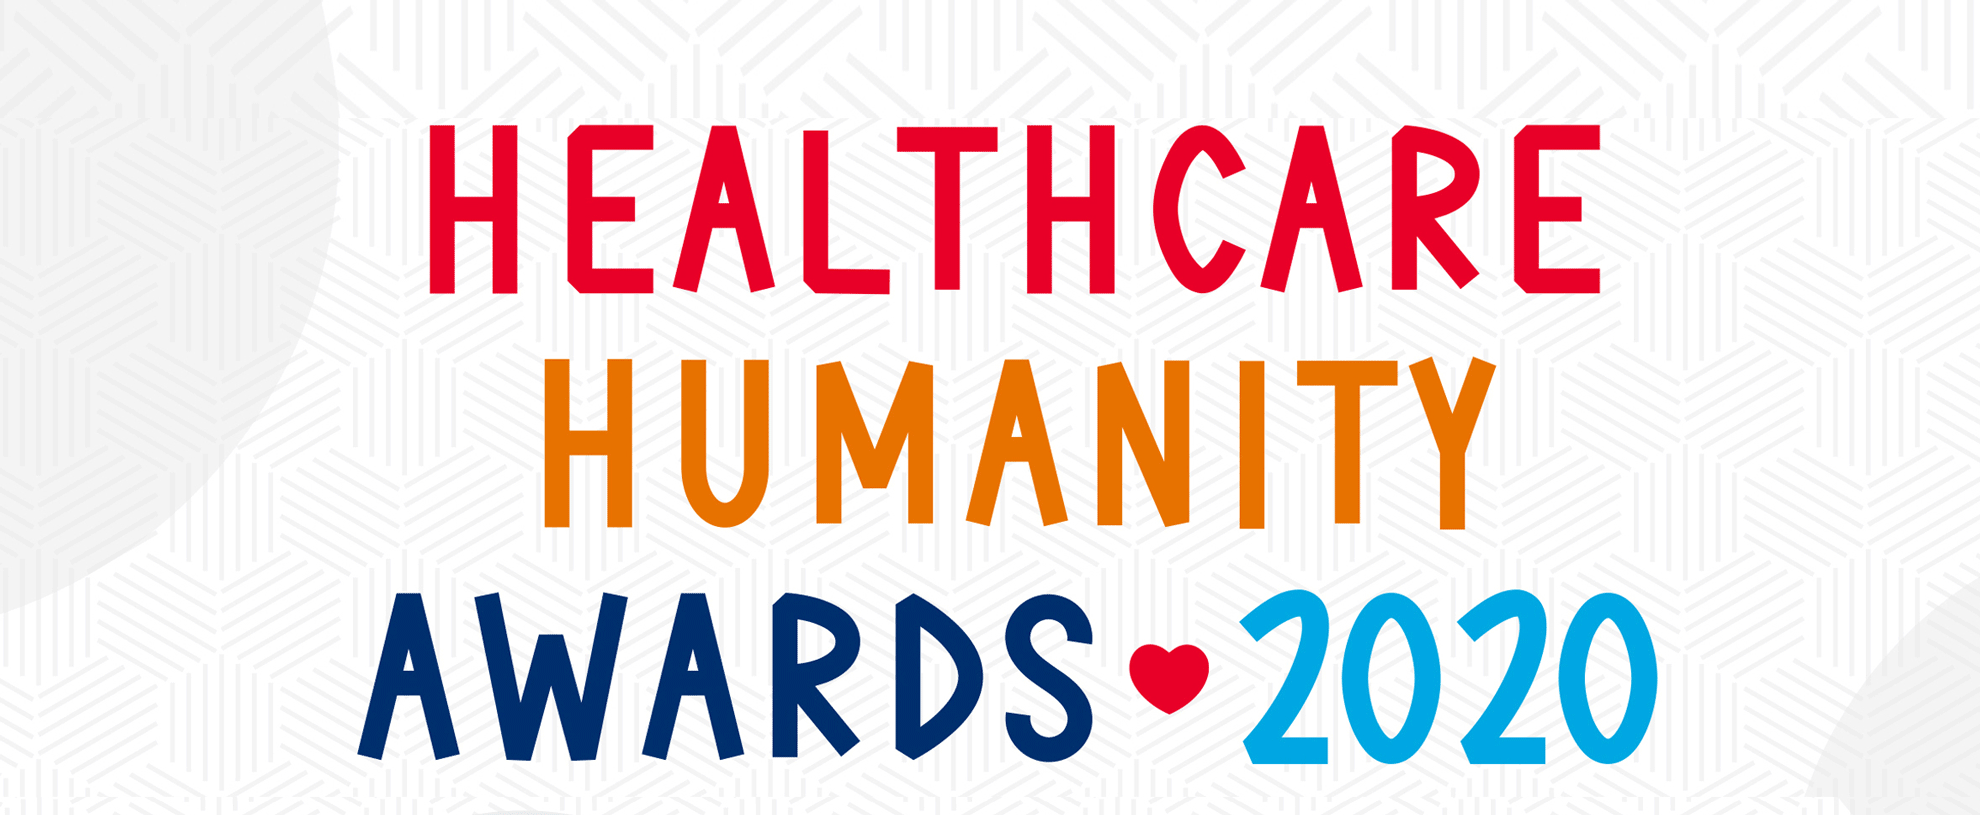 Healthcare Humanity Awards 2020